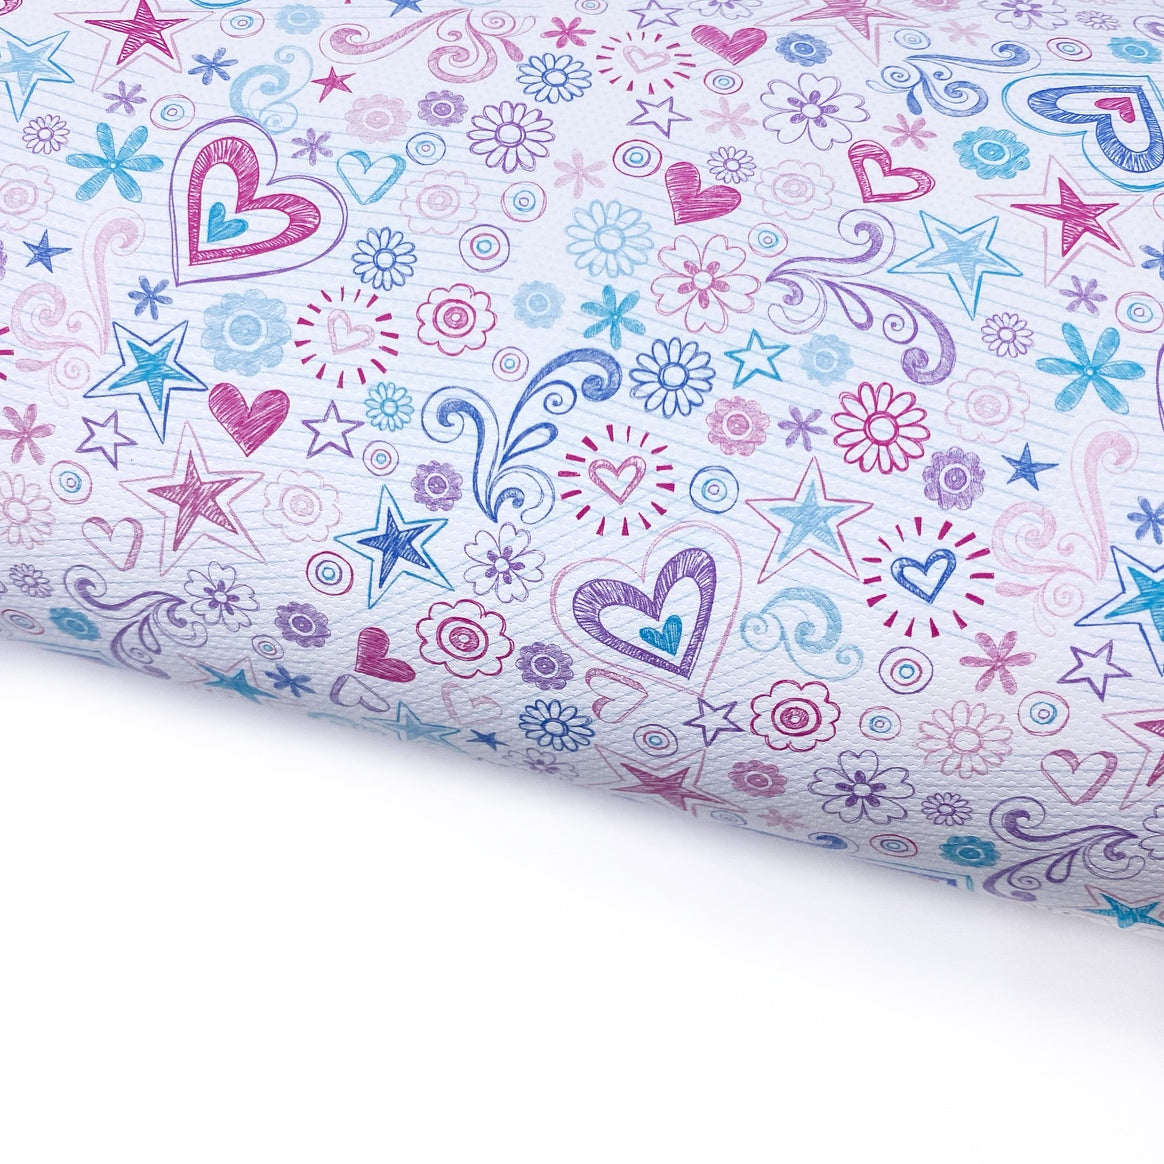 Girly Doodles Lux Premium Printed Bow Fabric